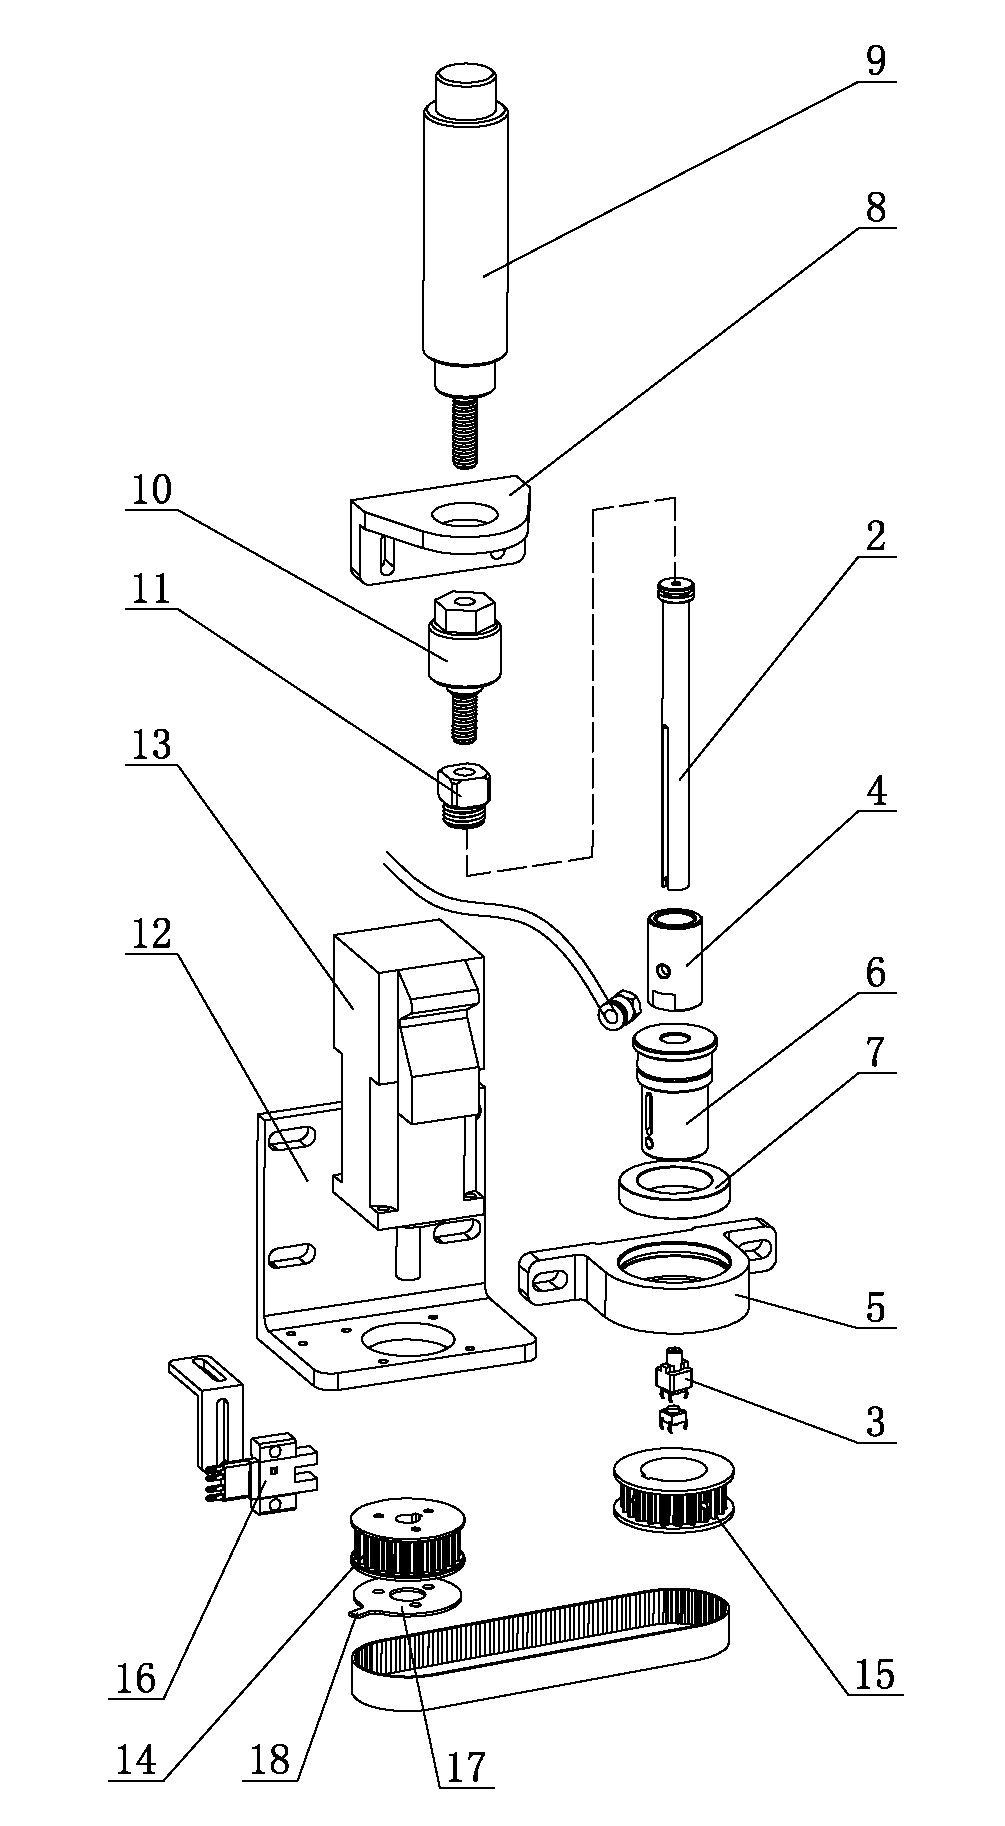 Head air-suction mechanism for inserting machine